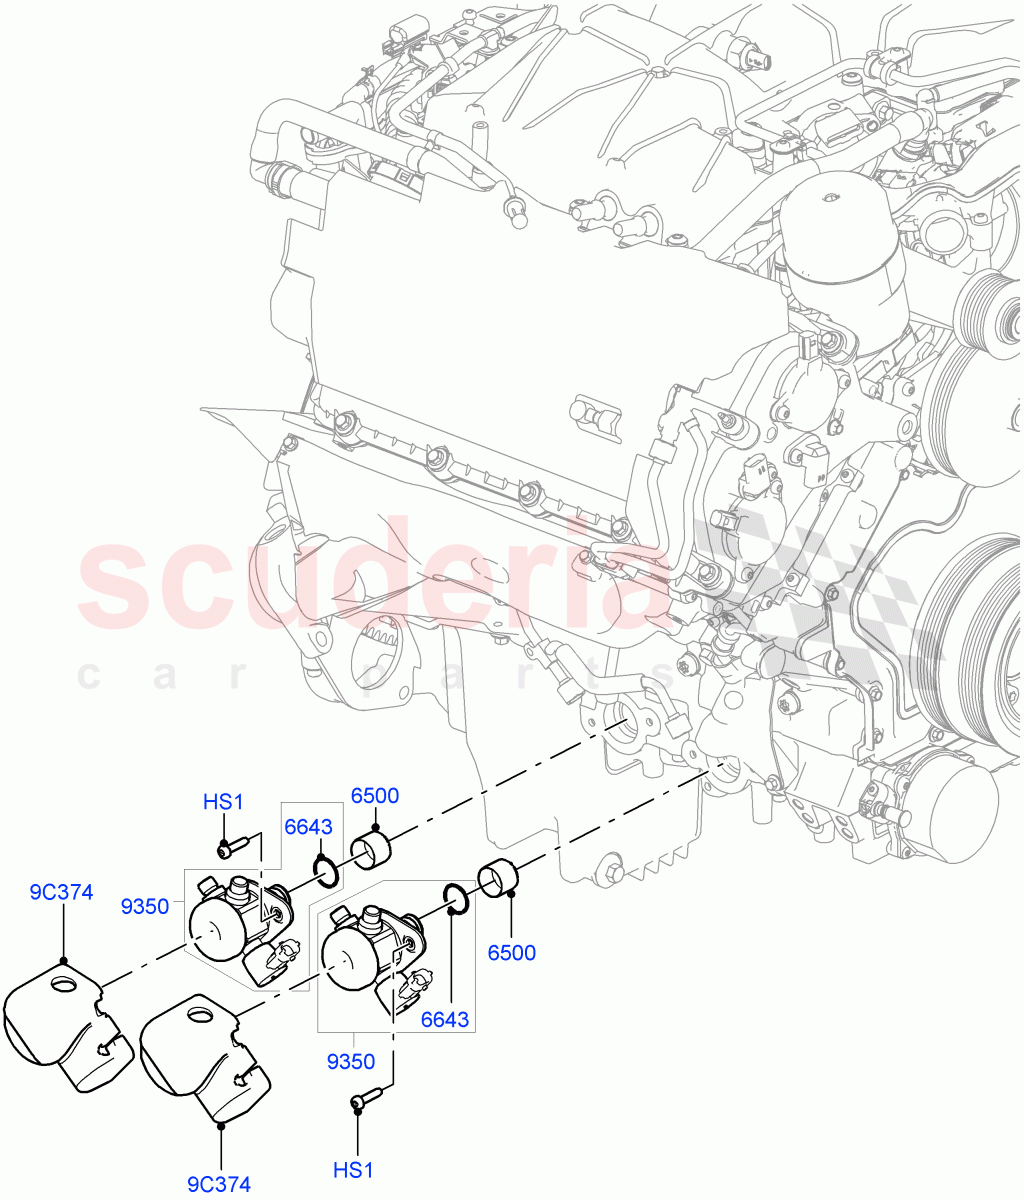 Fuel Injection Pump-Engine Mounted(Solihull Plant Build)(3.0L DOHC GDI SC V6 PETROL)((V)FROMEA000001) of Land Rover Land Rover Range Rover Sport (2014+) [3.0 DOHC GDI SC V6 Petrol]